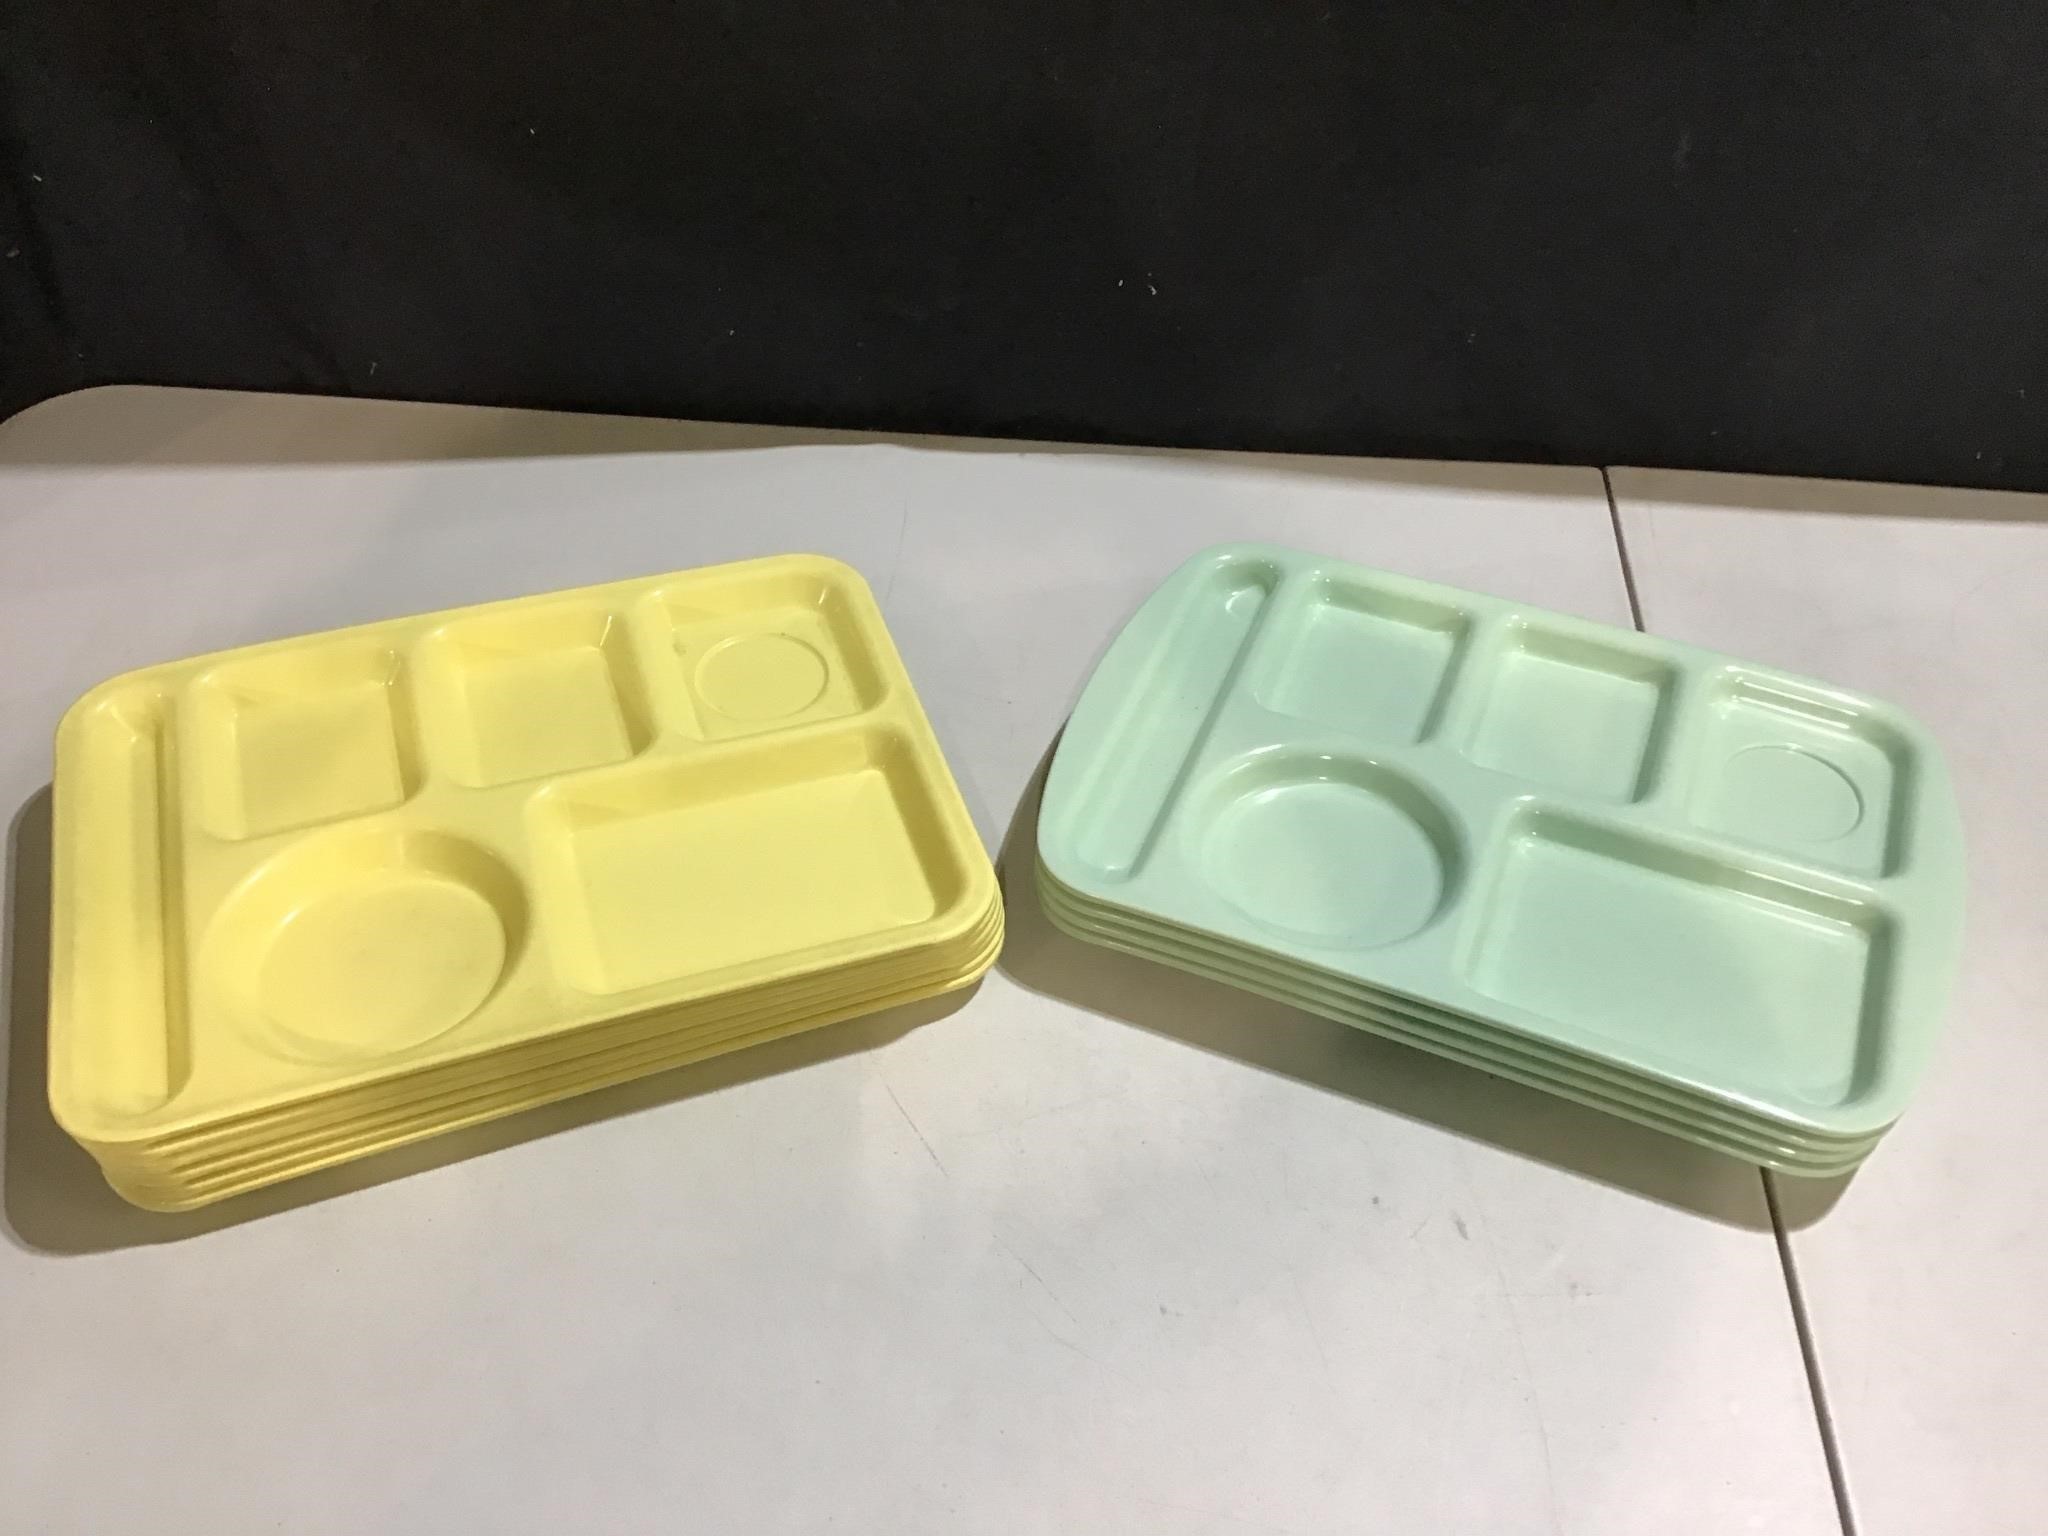 Cafeteria style trays; yellow/6, green/4